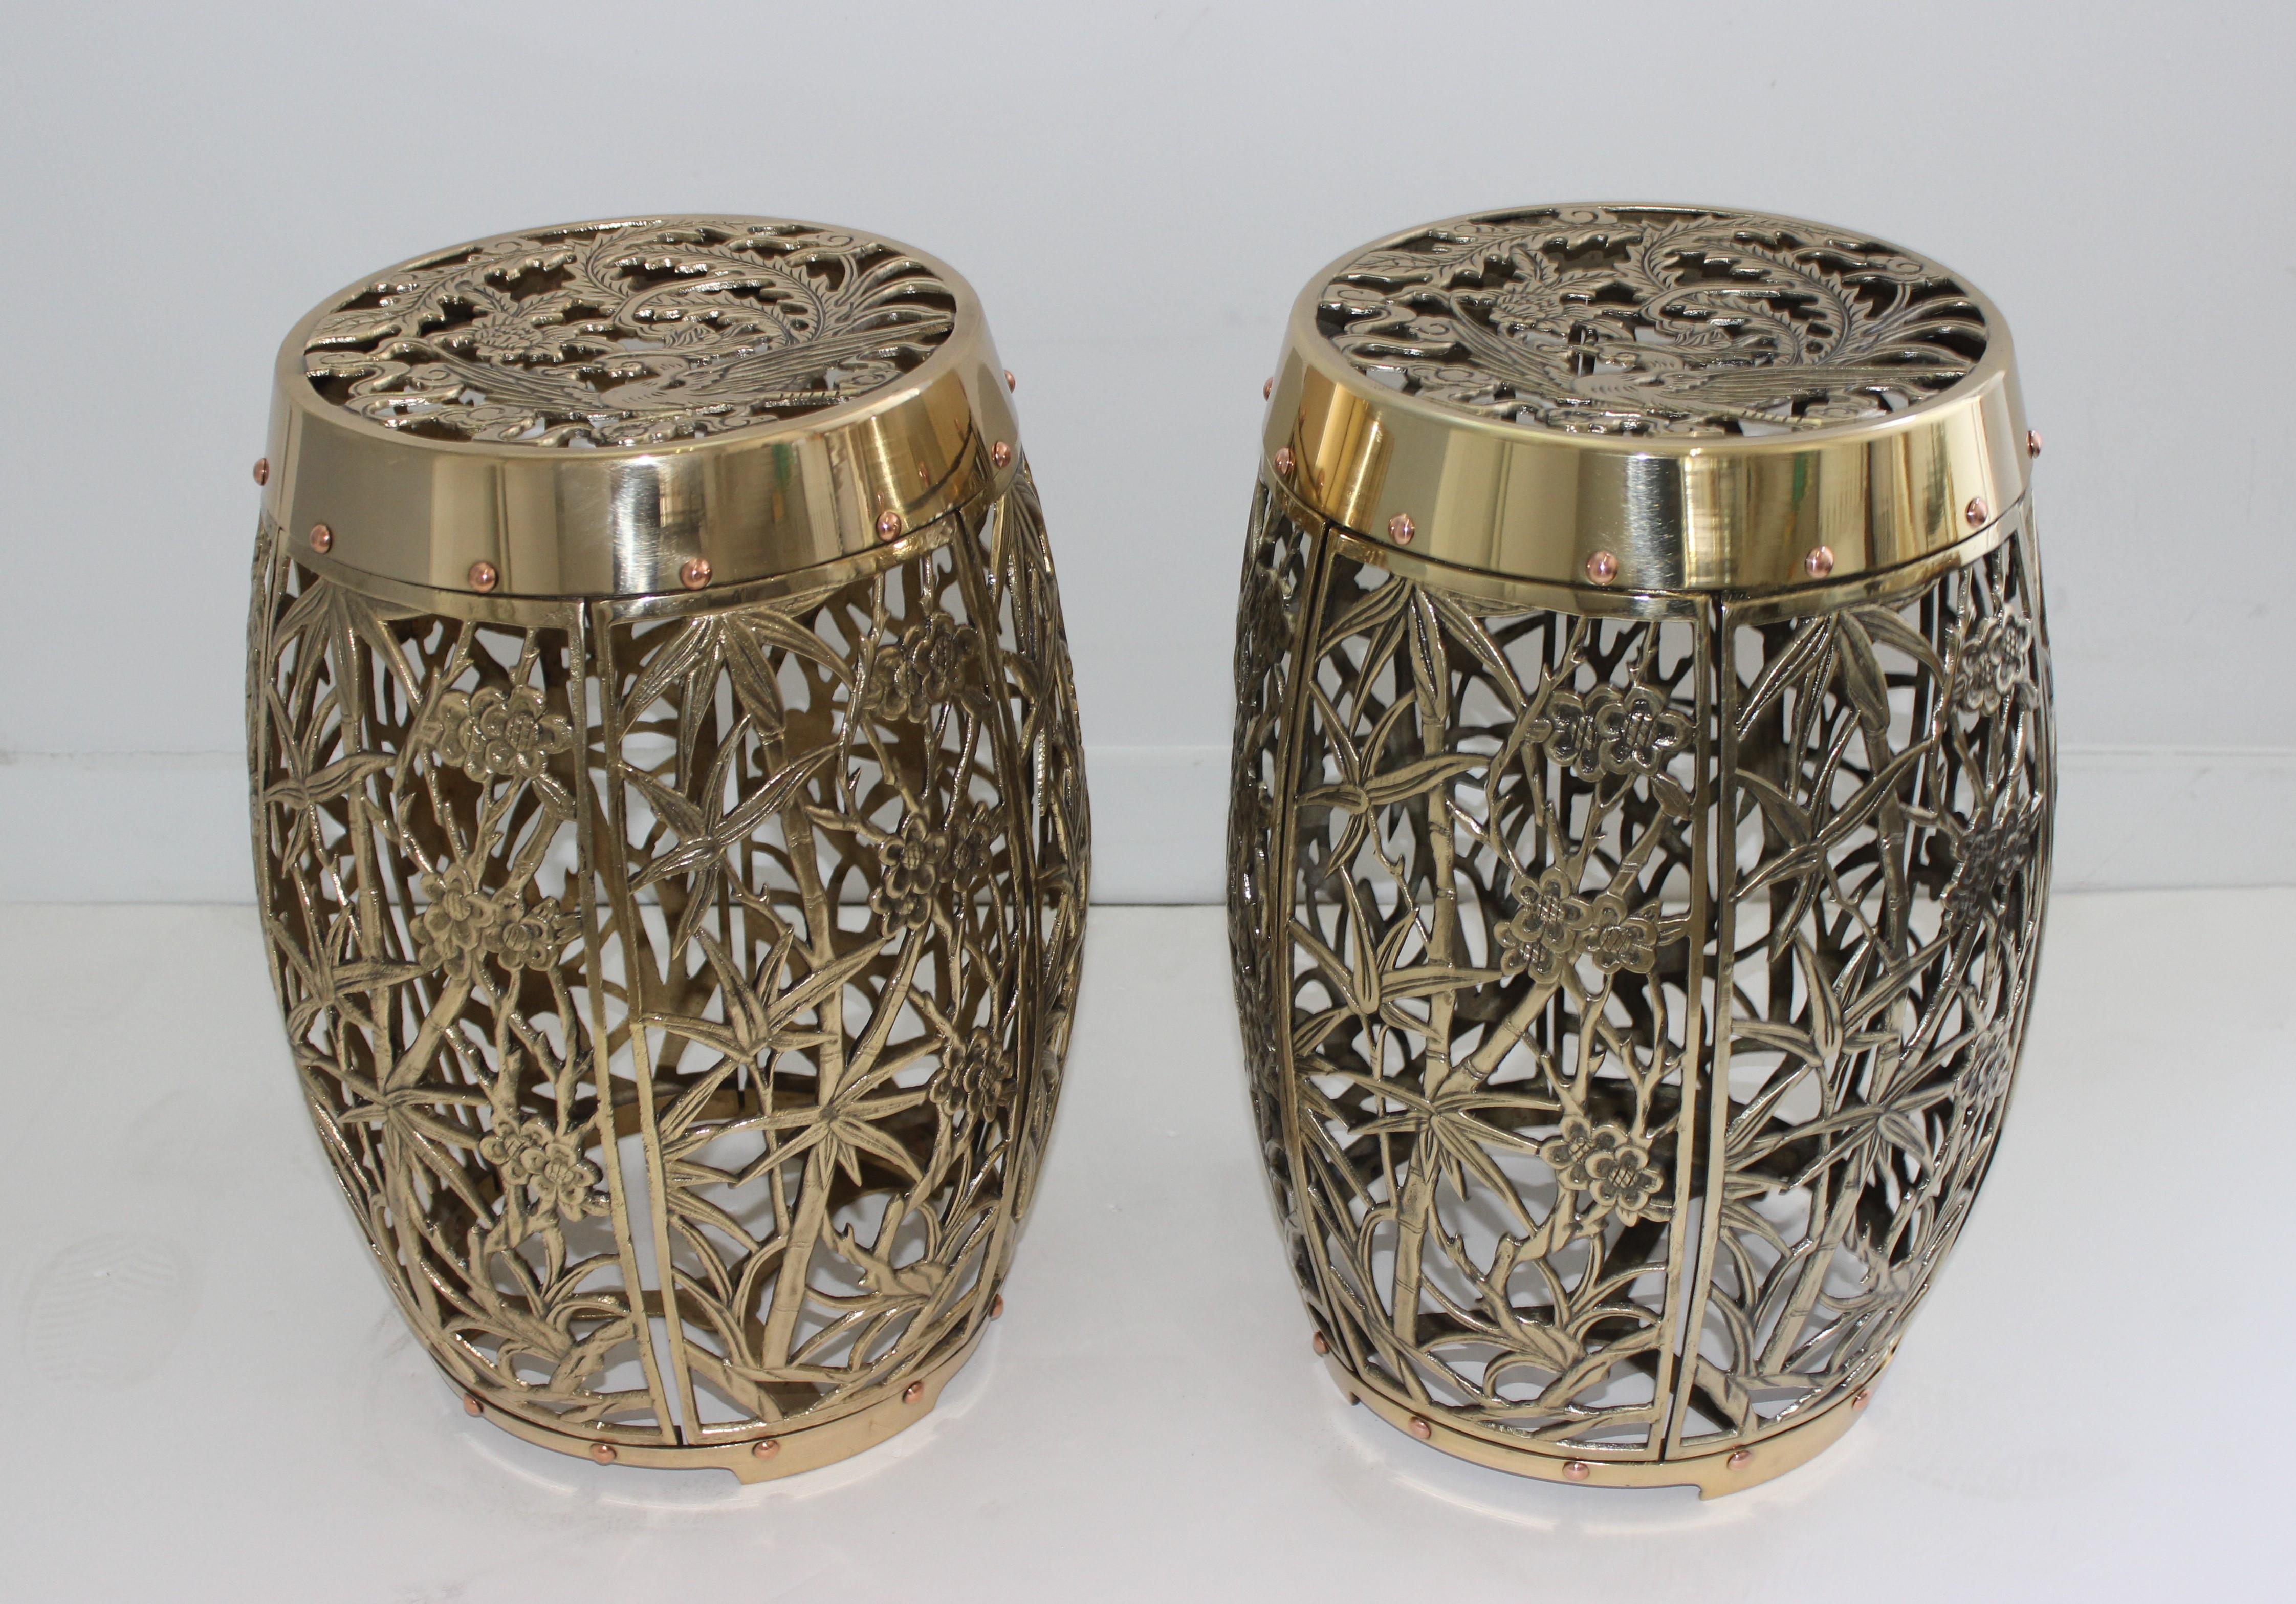 Pair of Garden Stools Polished Brass Copper Fretwork 2